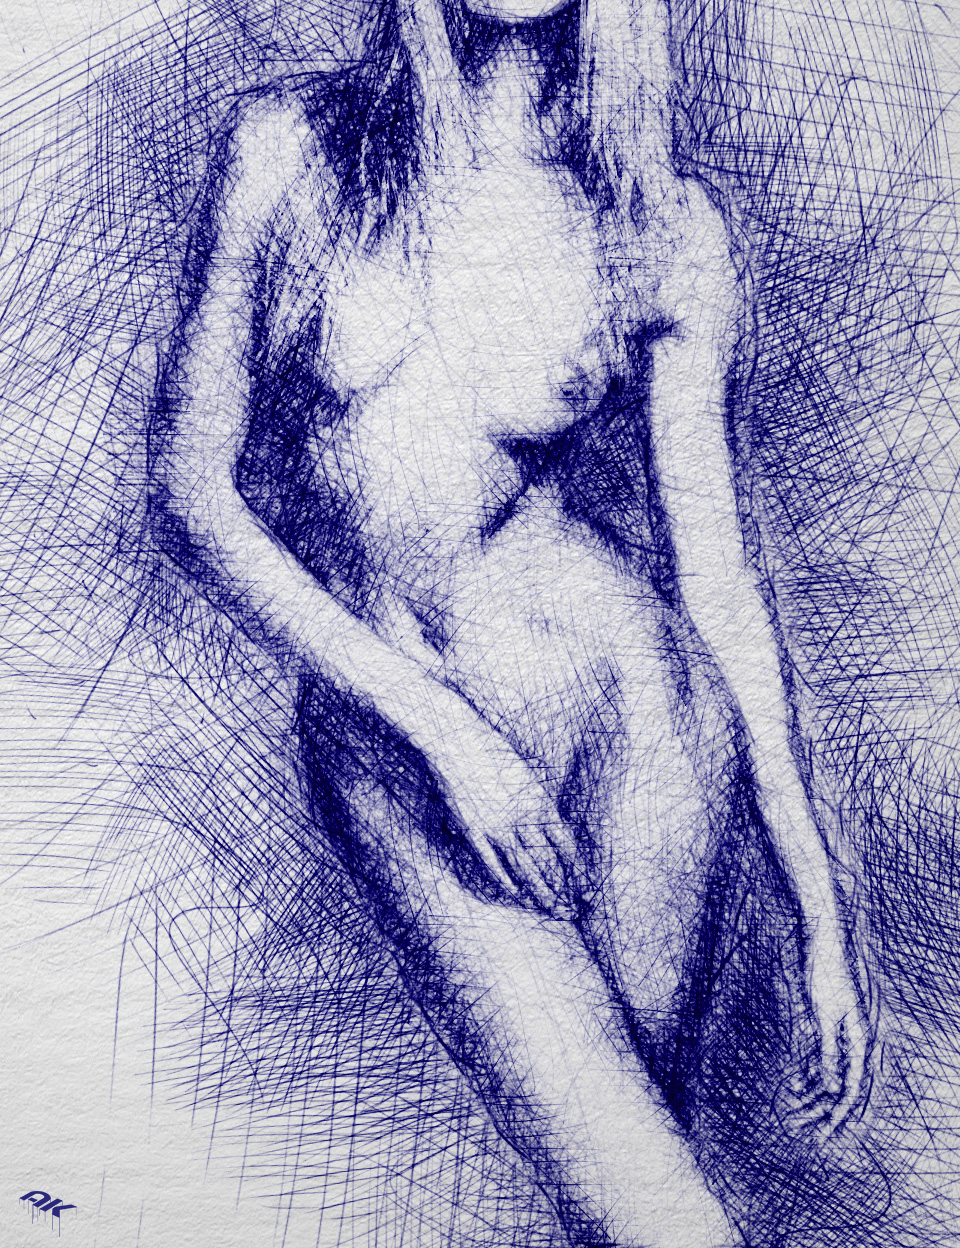 life-drawing-series-5-image-7-copyright-andrew-knutt